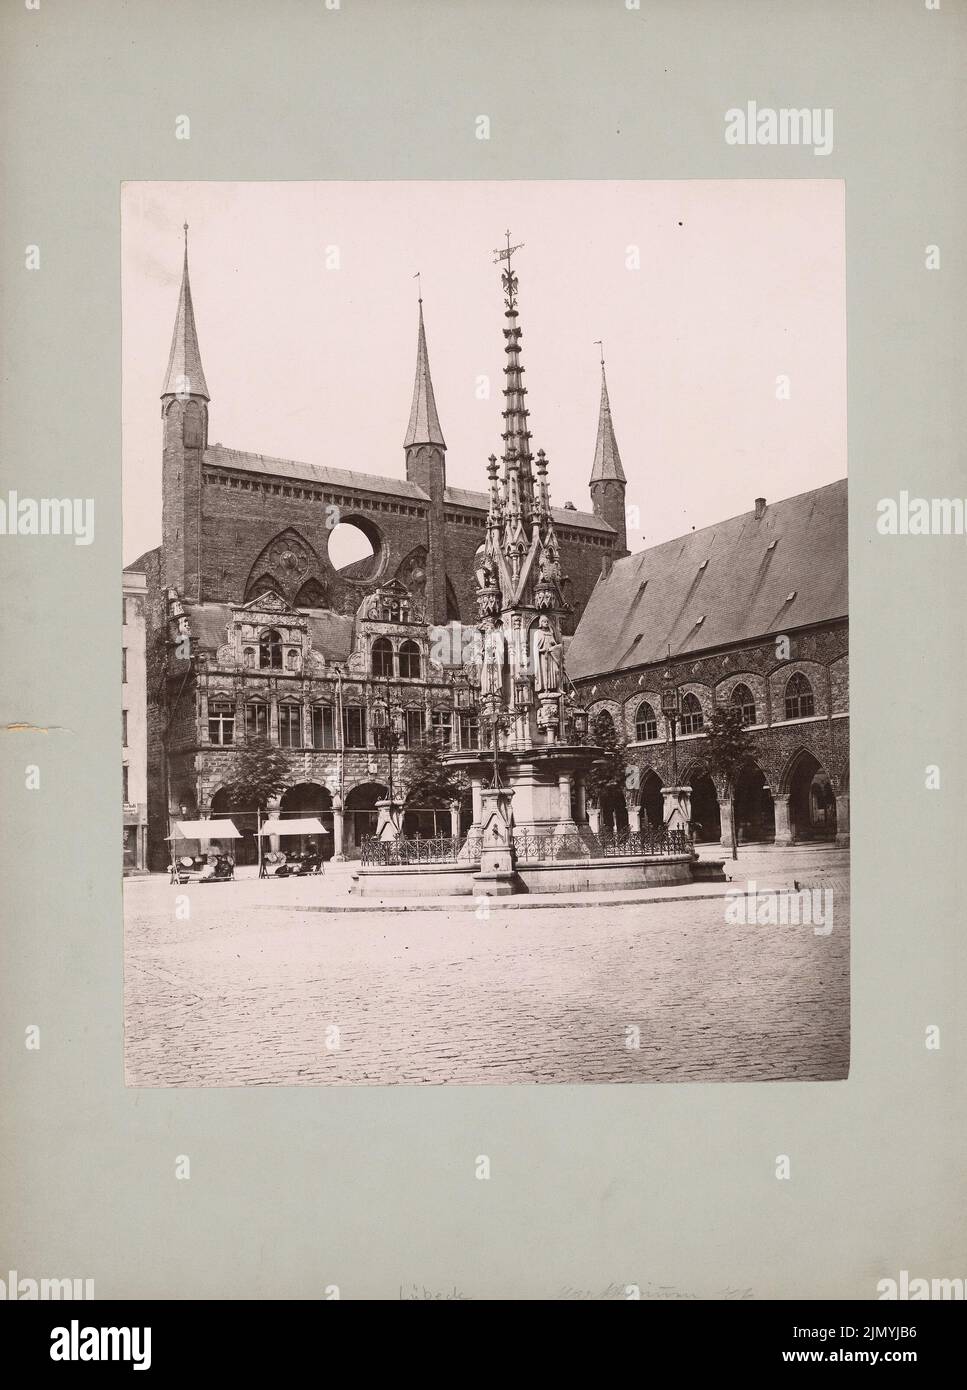 Unknown photographer, Marktbrunnen in Lübeck (without date): View Marktbrunnen (torn down), in the background of Marienkirche and town hall. Photo, 40.3 x 30 cm (including scan edges) Stock Photo